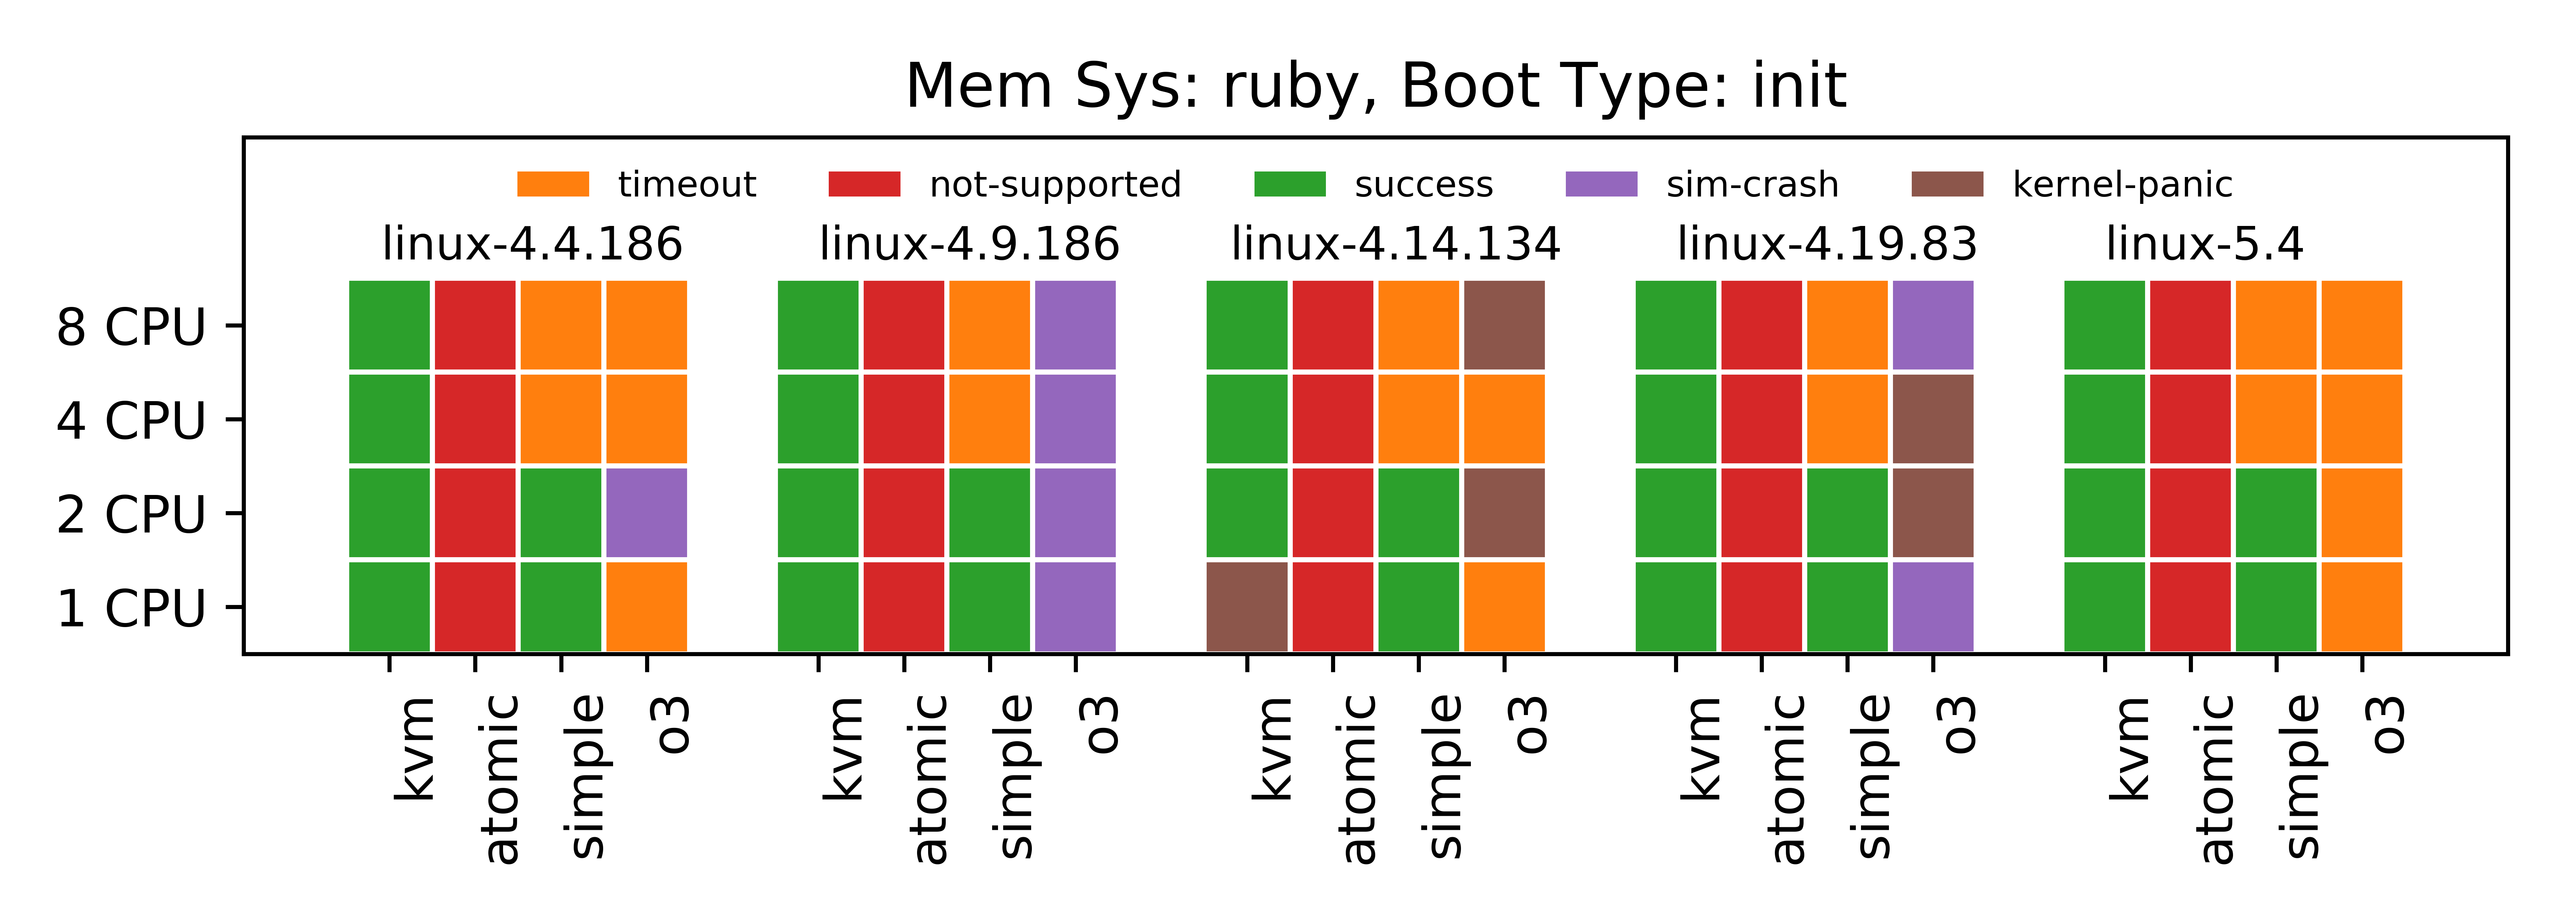 Linux boot status for ruby memory system and init boot